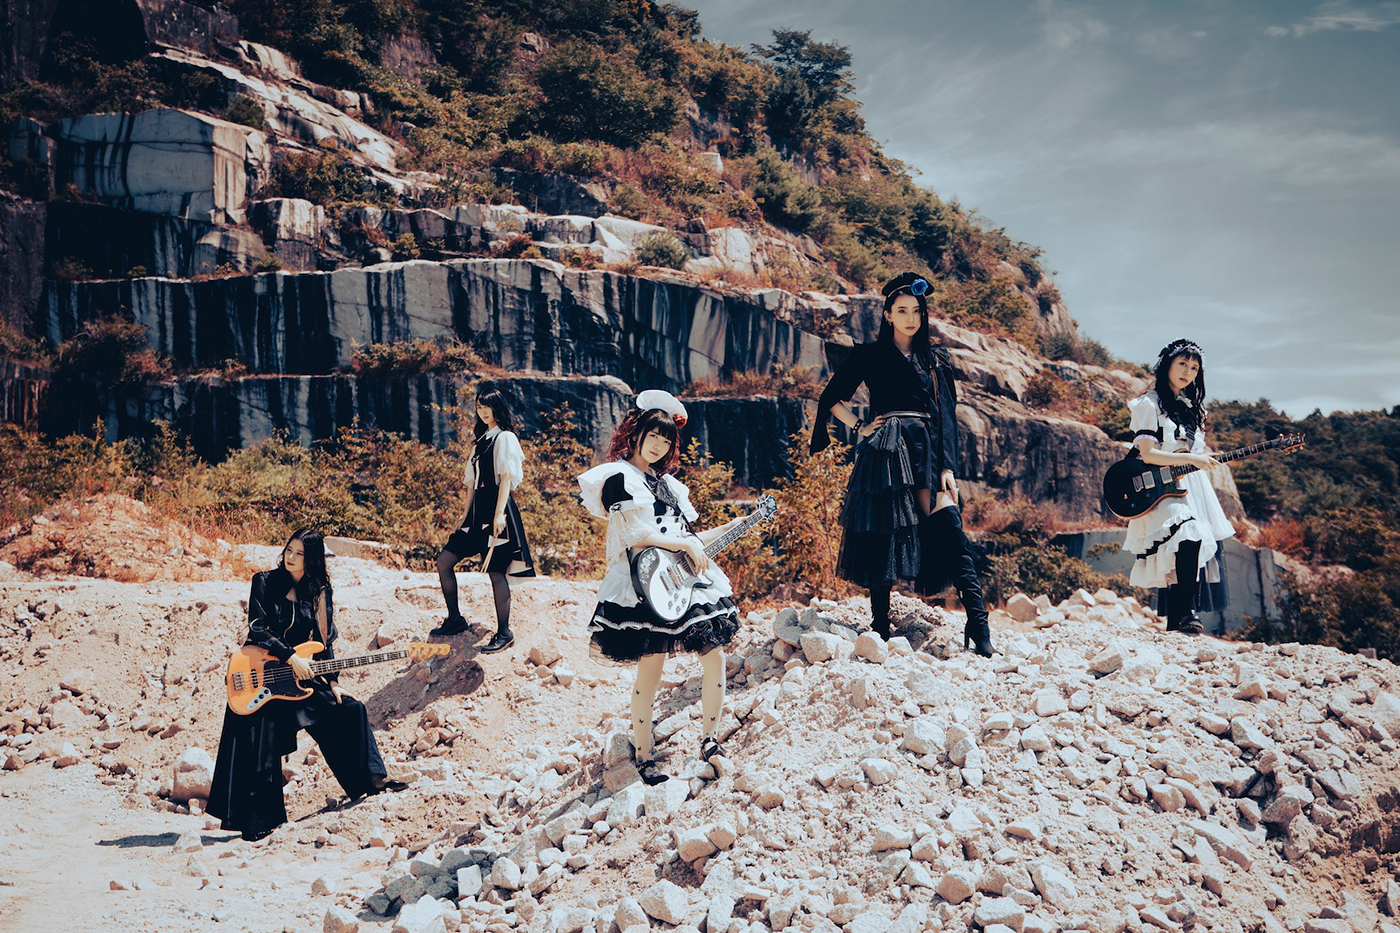 BAND-MAID、米・大型野外ロックフェス『POINTFEST 2023』に出演決定 - 画像一覧（2/2）